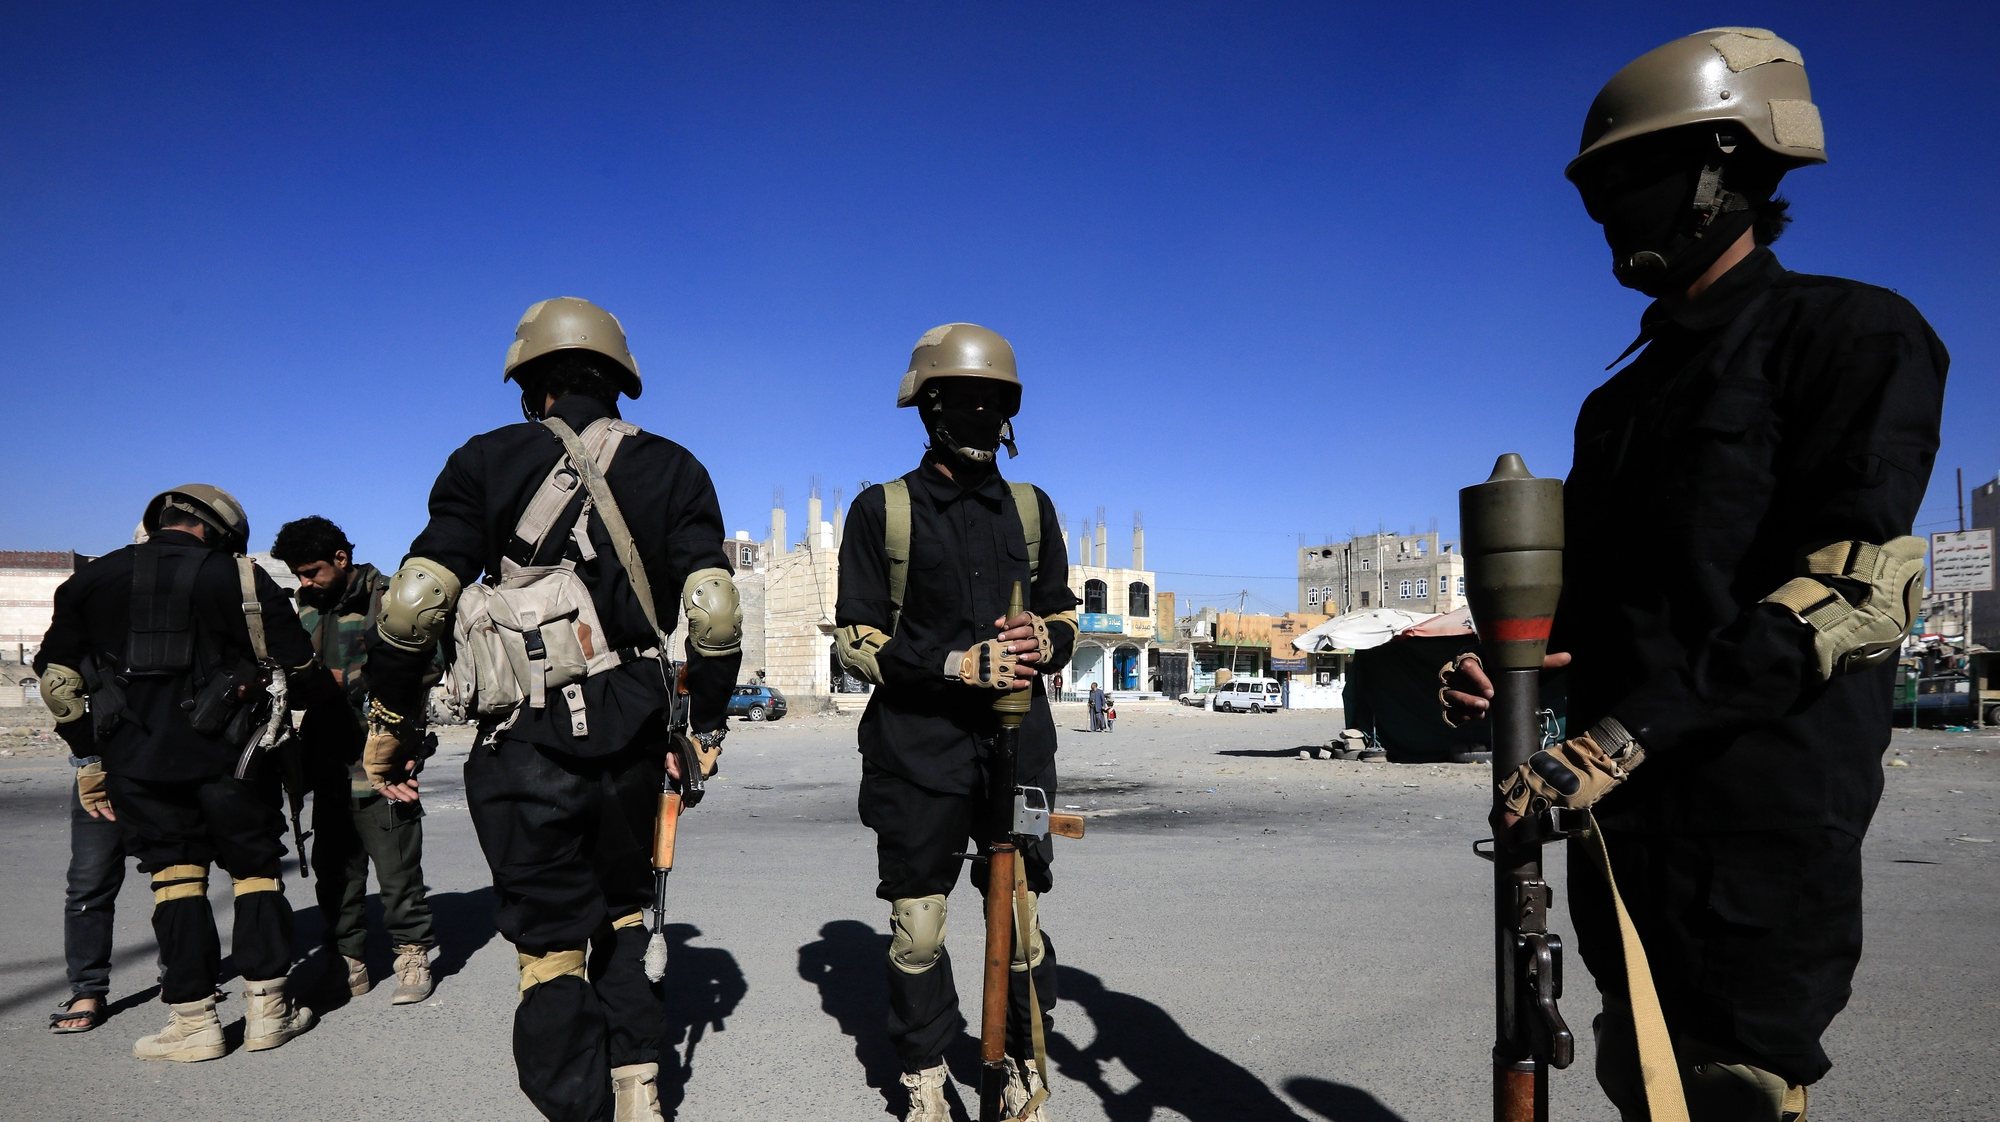 epaselect epa11069998 Houthi troopers patrol during a gathering at the end of a military training, in Sana&#039;a, Yemen, 11 January 2024. Yemen&#039;s Houthis top leader Abdul-Malik Al-Houthi has warned in a televised address on 11 January that any US military operation against his movement will never go unanswered, two days after the Houthis launched a large-scale missile and drone attack against international shipping lanes in the Red Sea, in response to a previous US Navy attack on Houthi boats in the Red Sea that killed 10 Houthi fighters on 31 December 2023. The US Department of Defense had announced in December 2023 a multinational operation to safeguard trade and to protect ships in the Red Sea amid the recent escalation in Houthi attacks. The Houthis have vowed to attack Israeli-bound ships and prevent them from navigating in the Red Sea and the Bab al-Mandab Strait in retaliation for Israel&#039;s airstrikes on the Gaza Strip.  EPA/YAHYA ARHAB